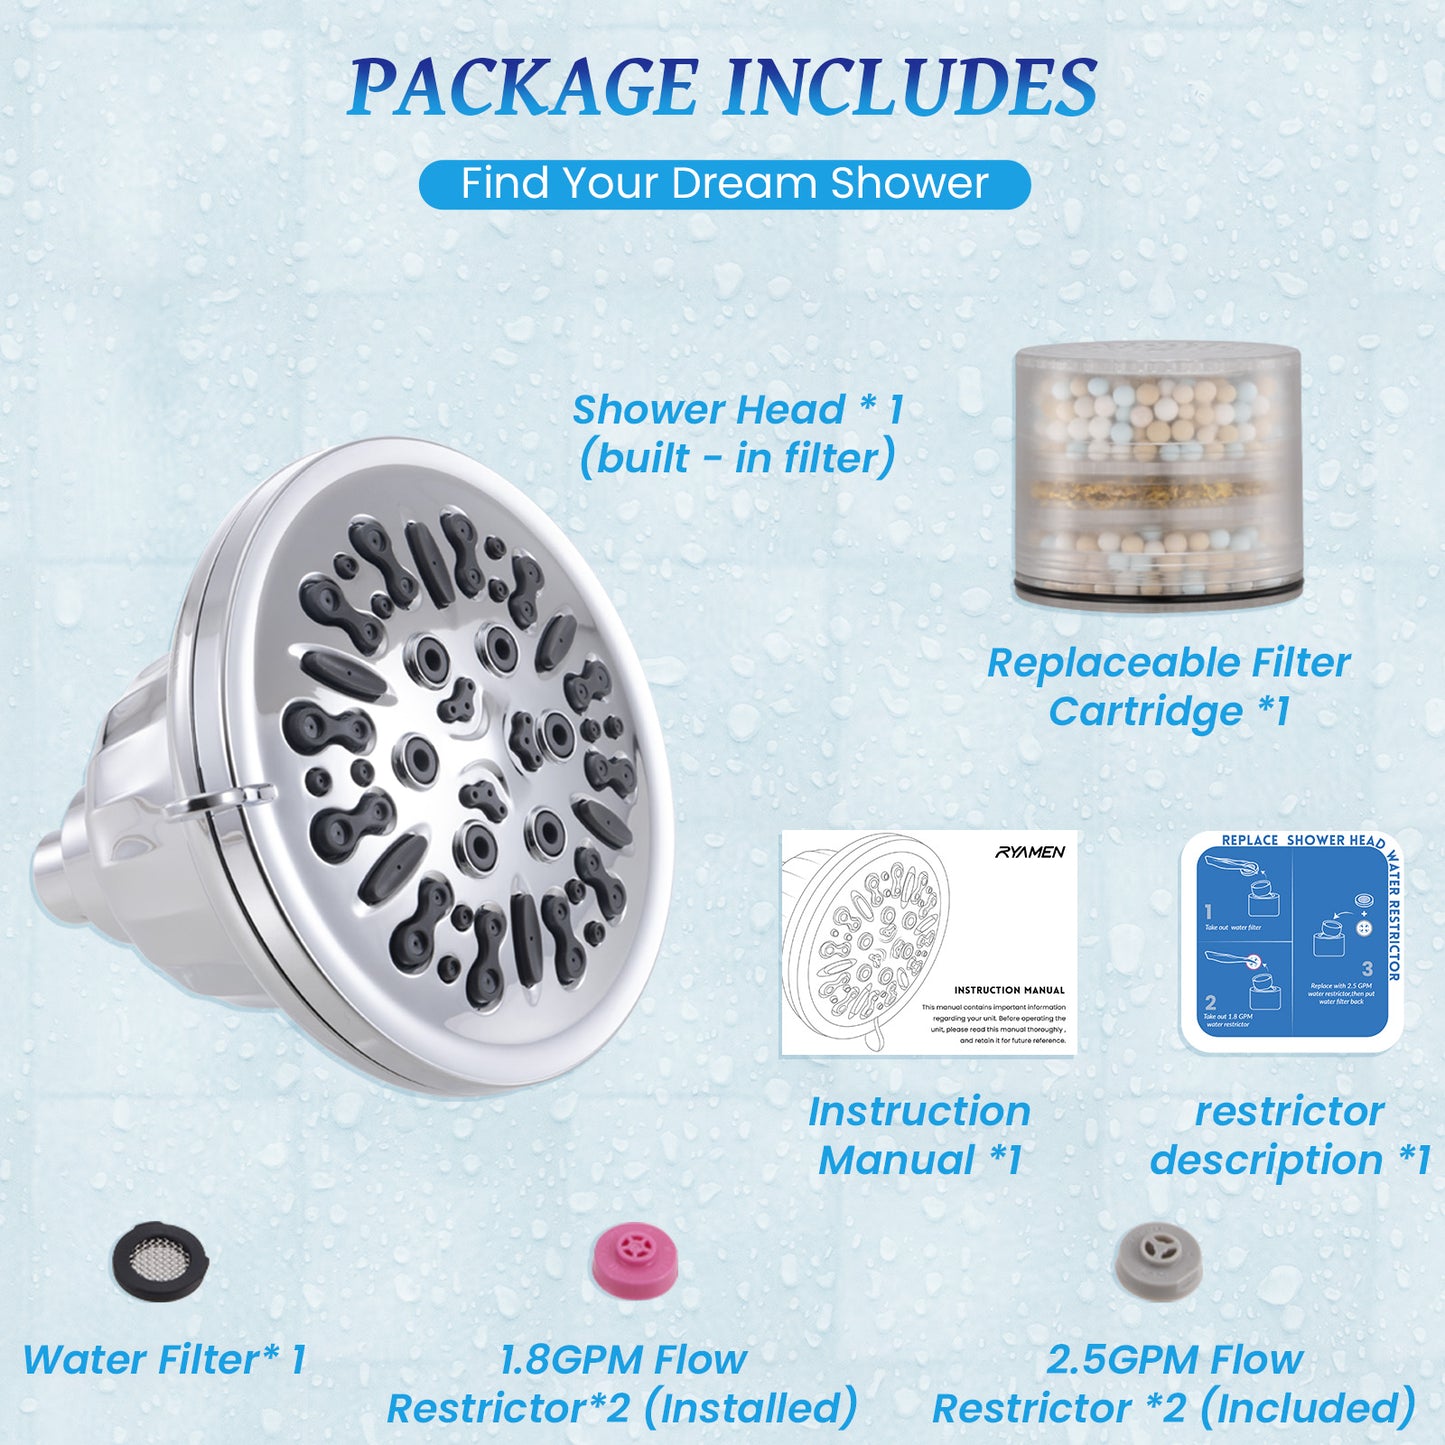 Filtered Shower Head, 5.5" Fixed High-Pressure Rain/Rainfall Shower Head for hard water, 6 Settings Water Softener Showerhead c]with Filter, Remove Chlorine and Heavy Metals